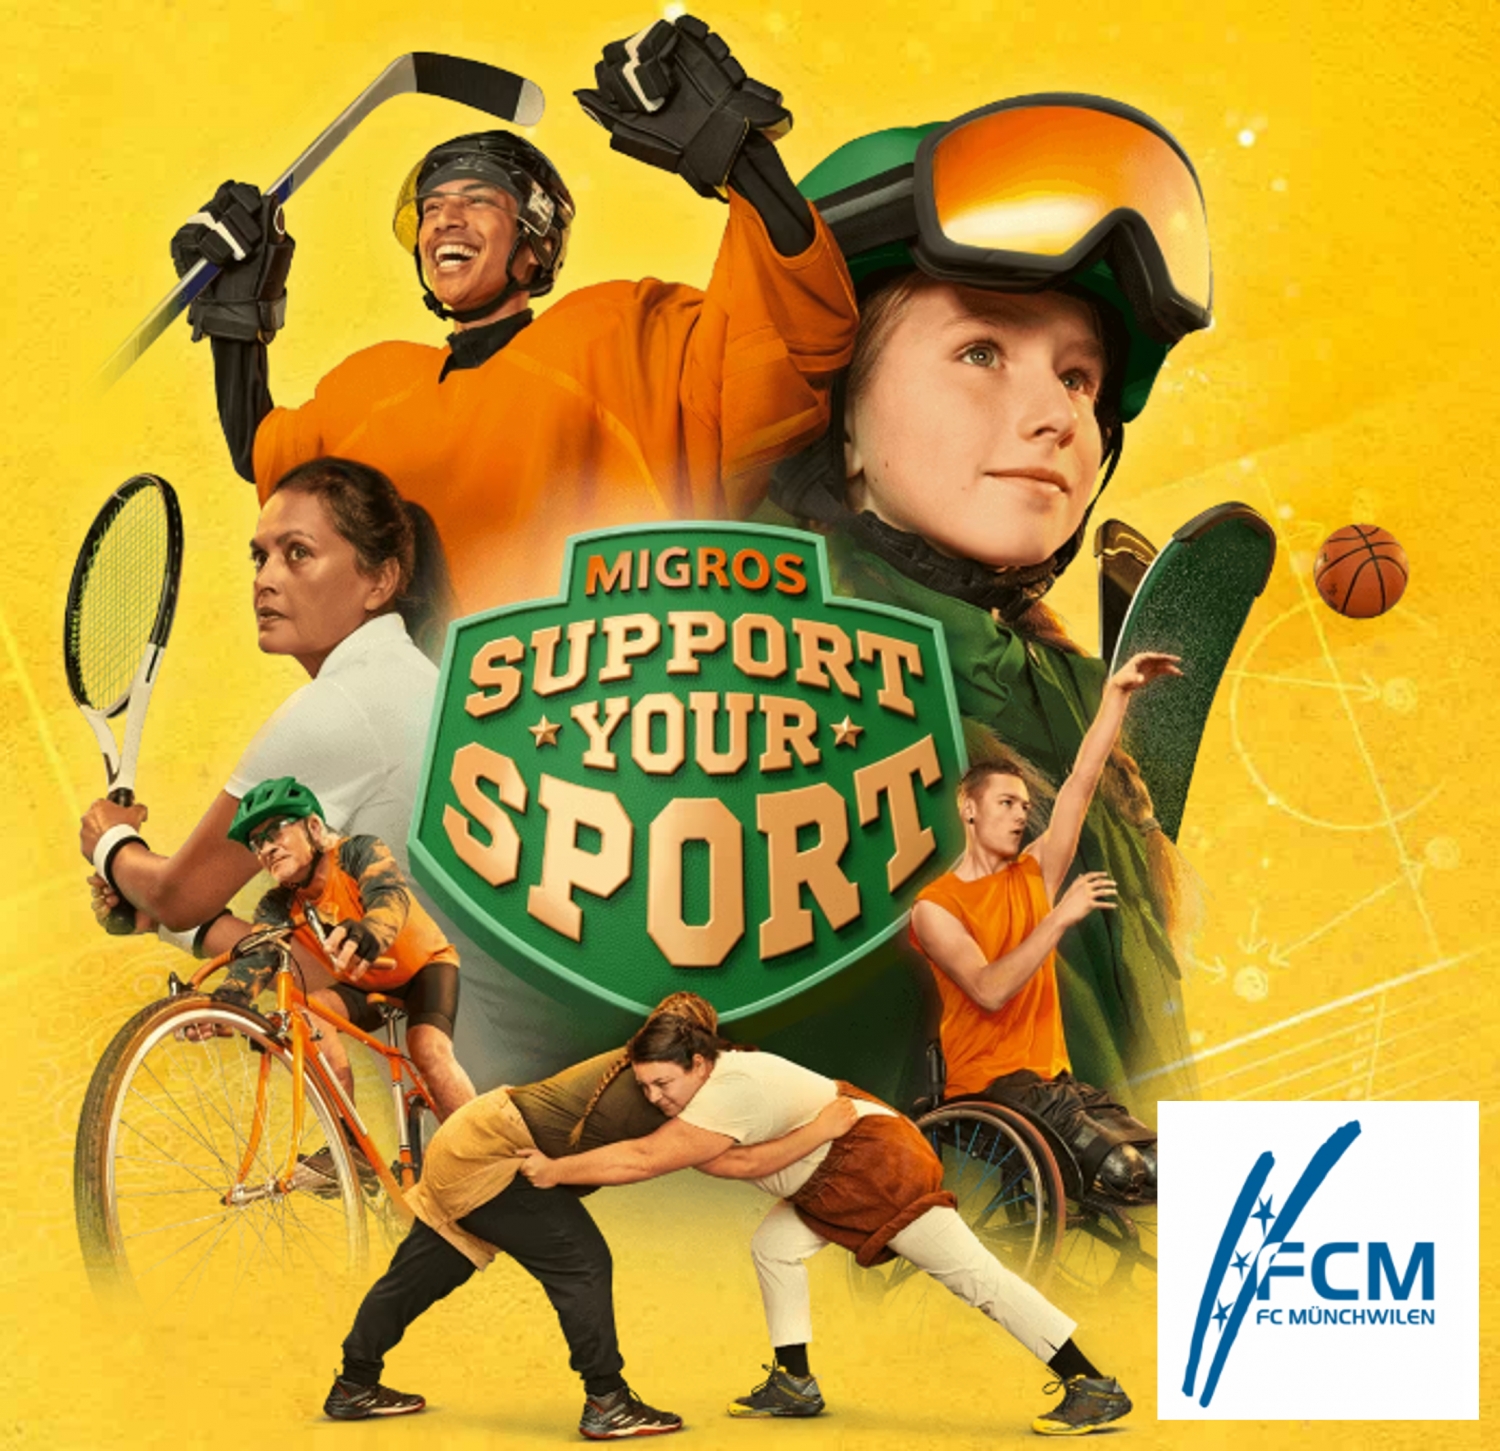 &quot;Support your Sport&quot; by Migros